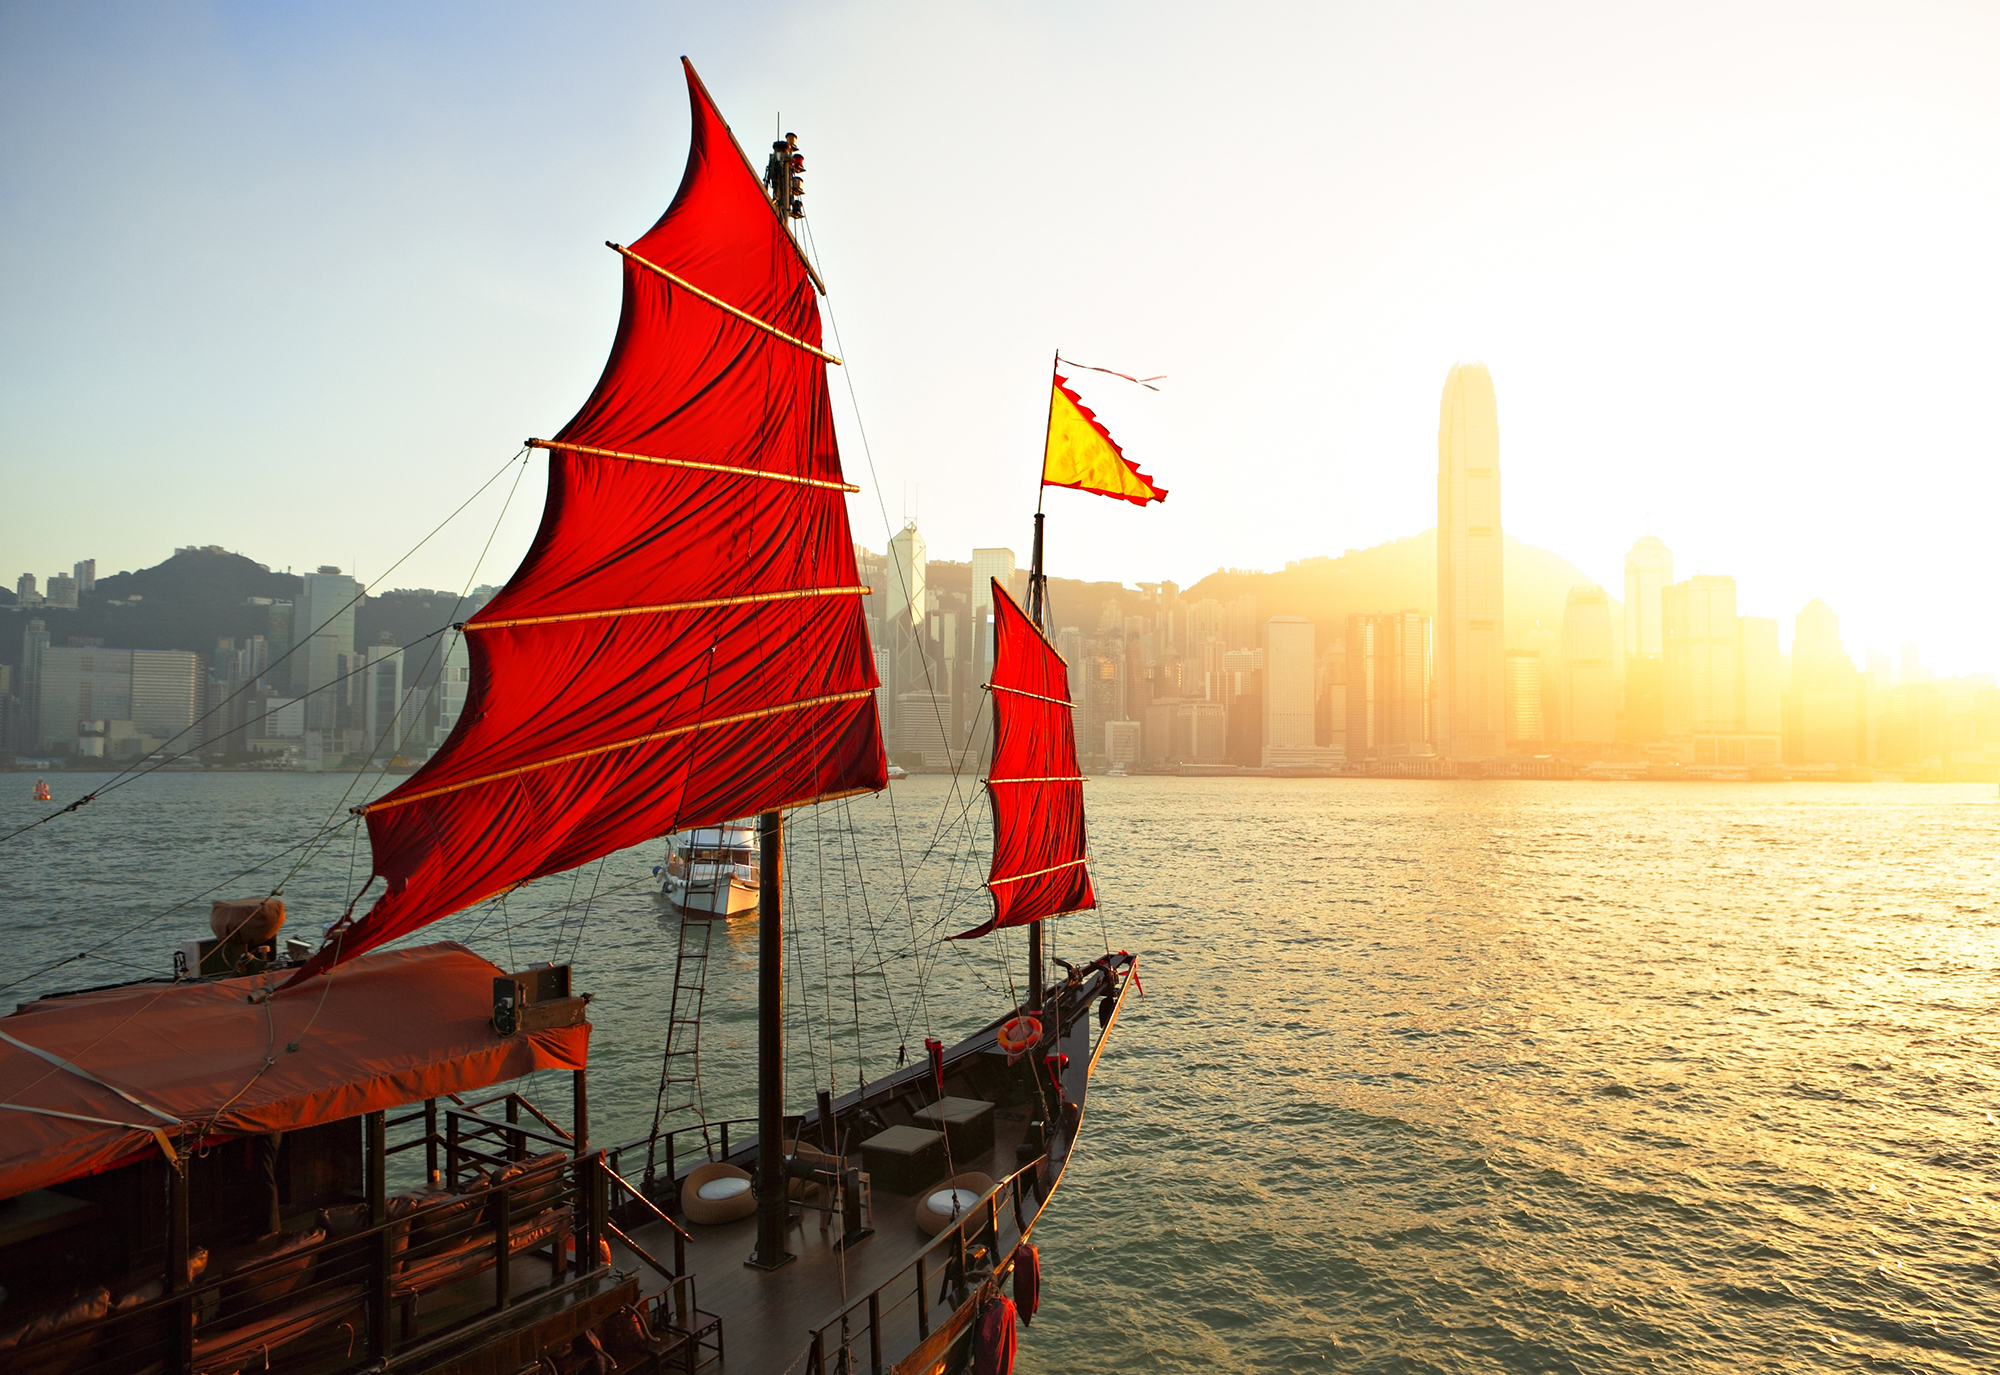 Junk boat on the Hong Kong harbour at sunset.